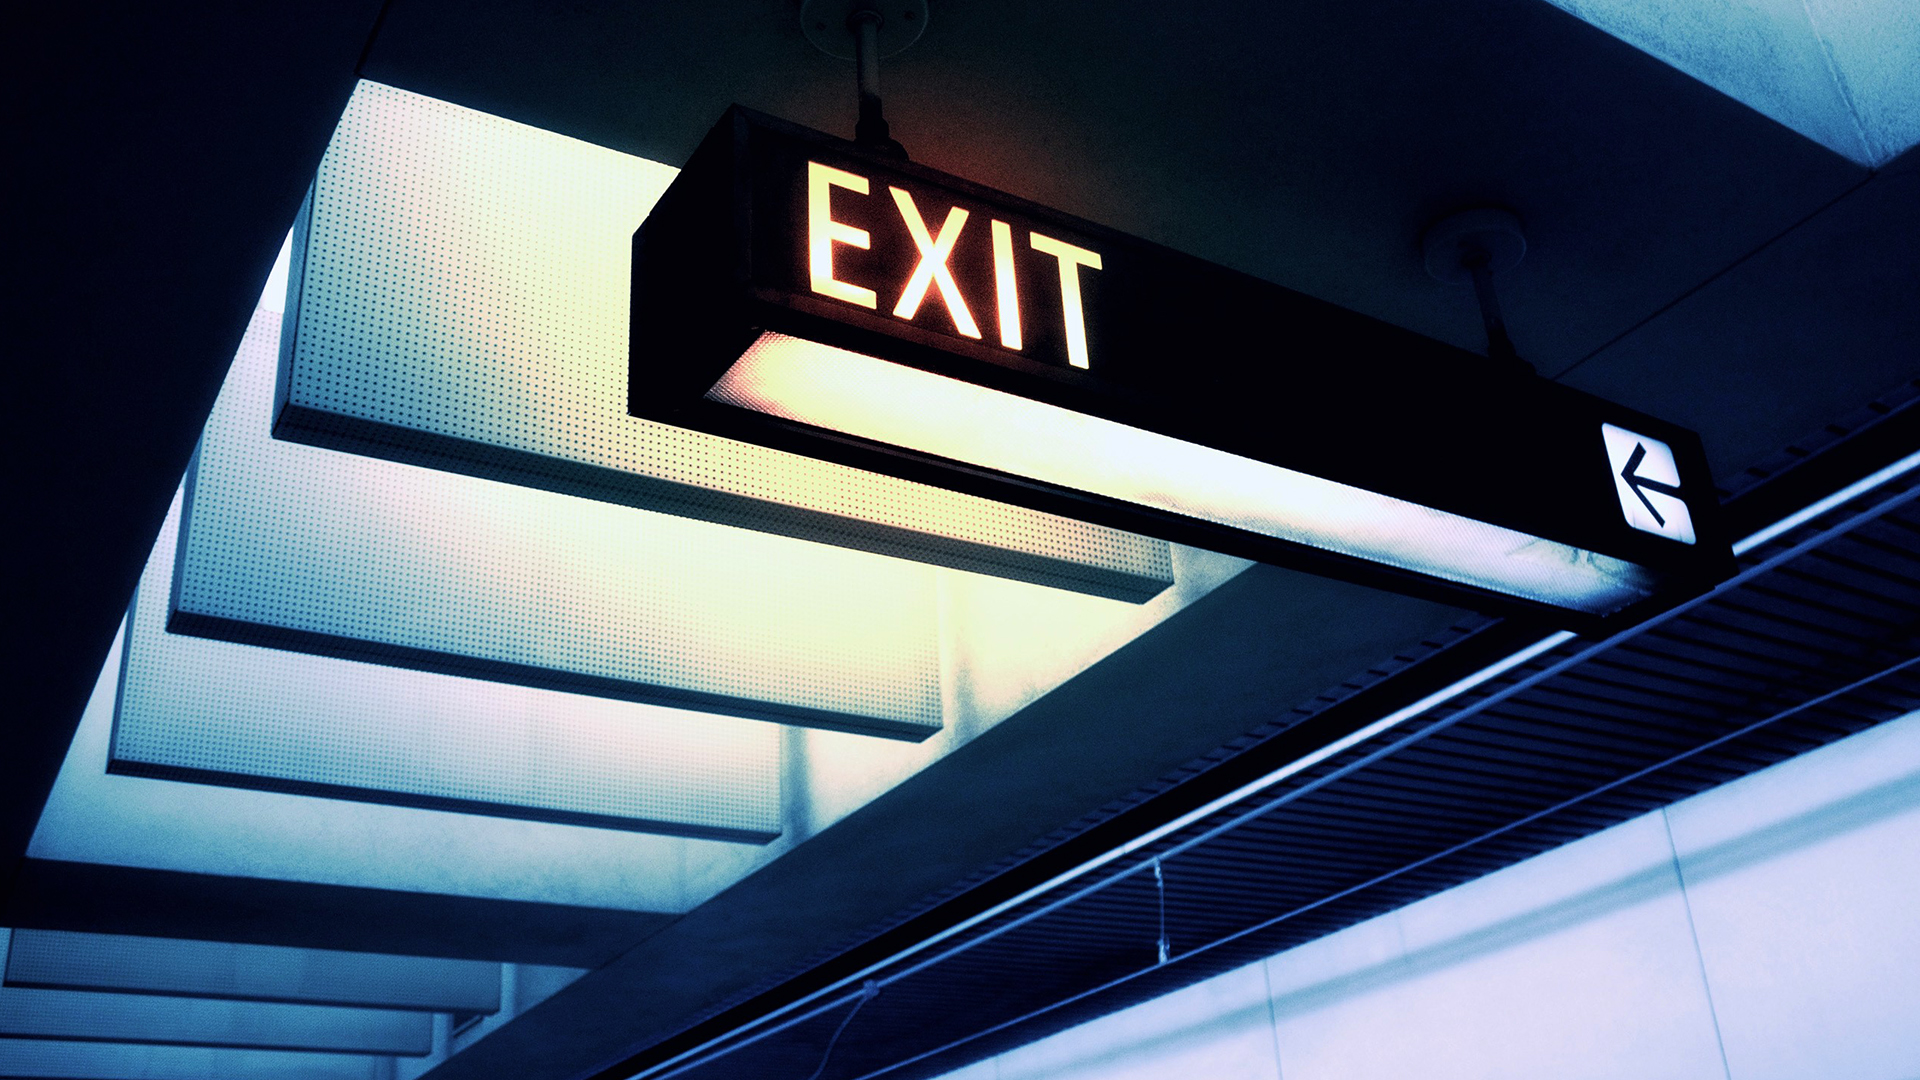 Exit Lights Signboard 1920x1080